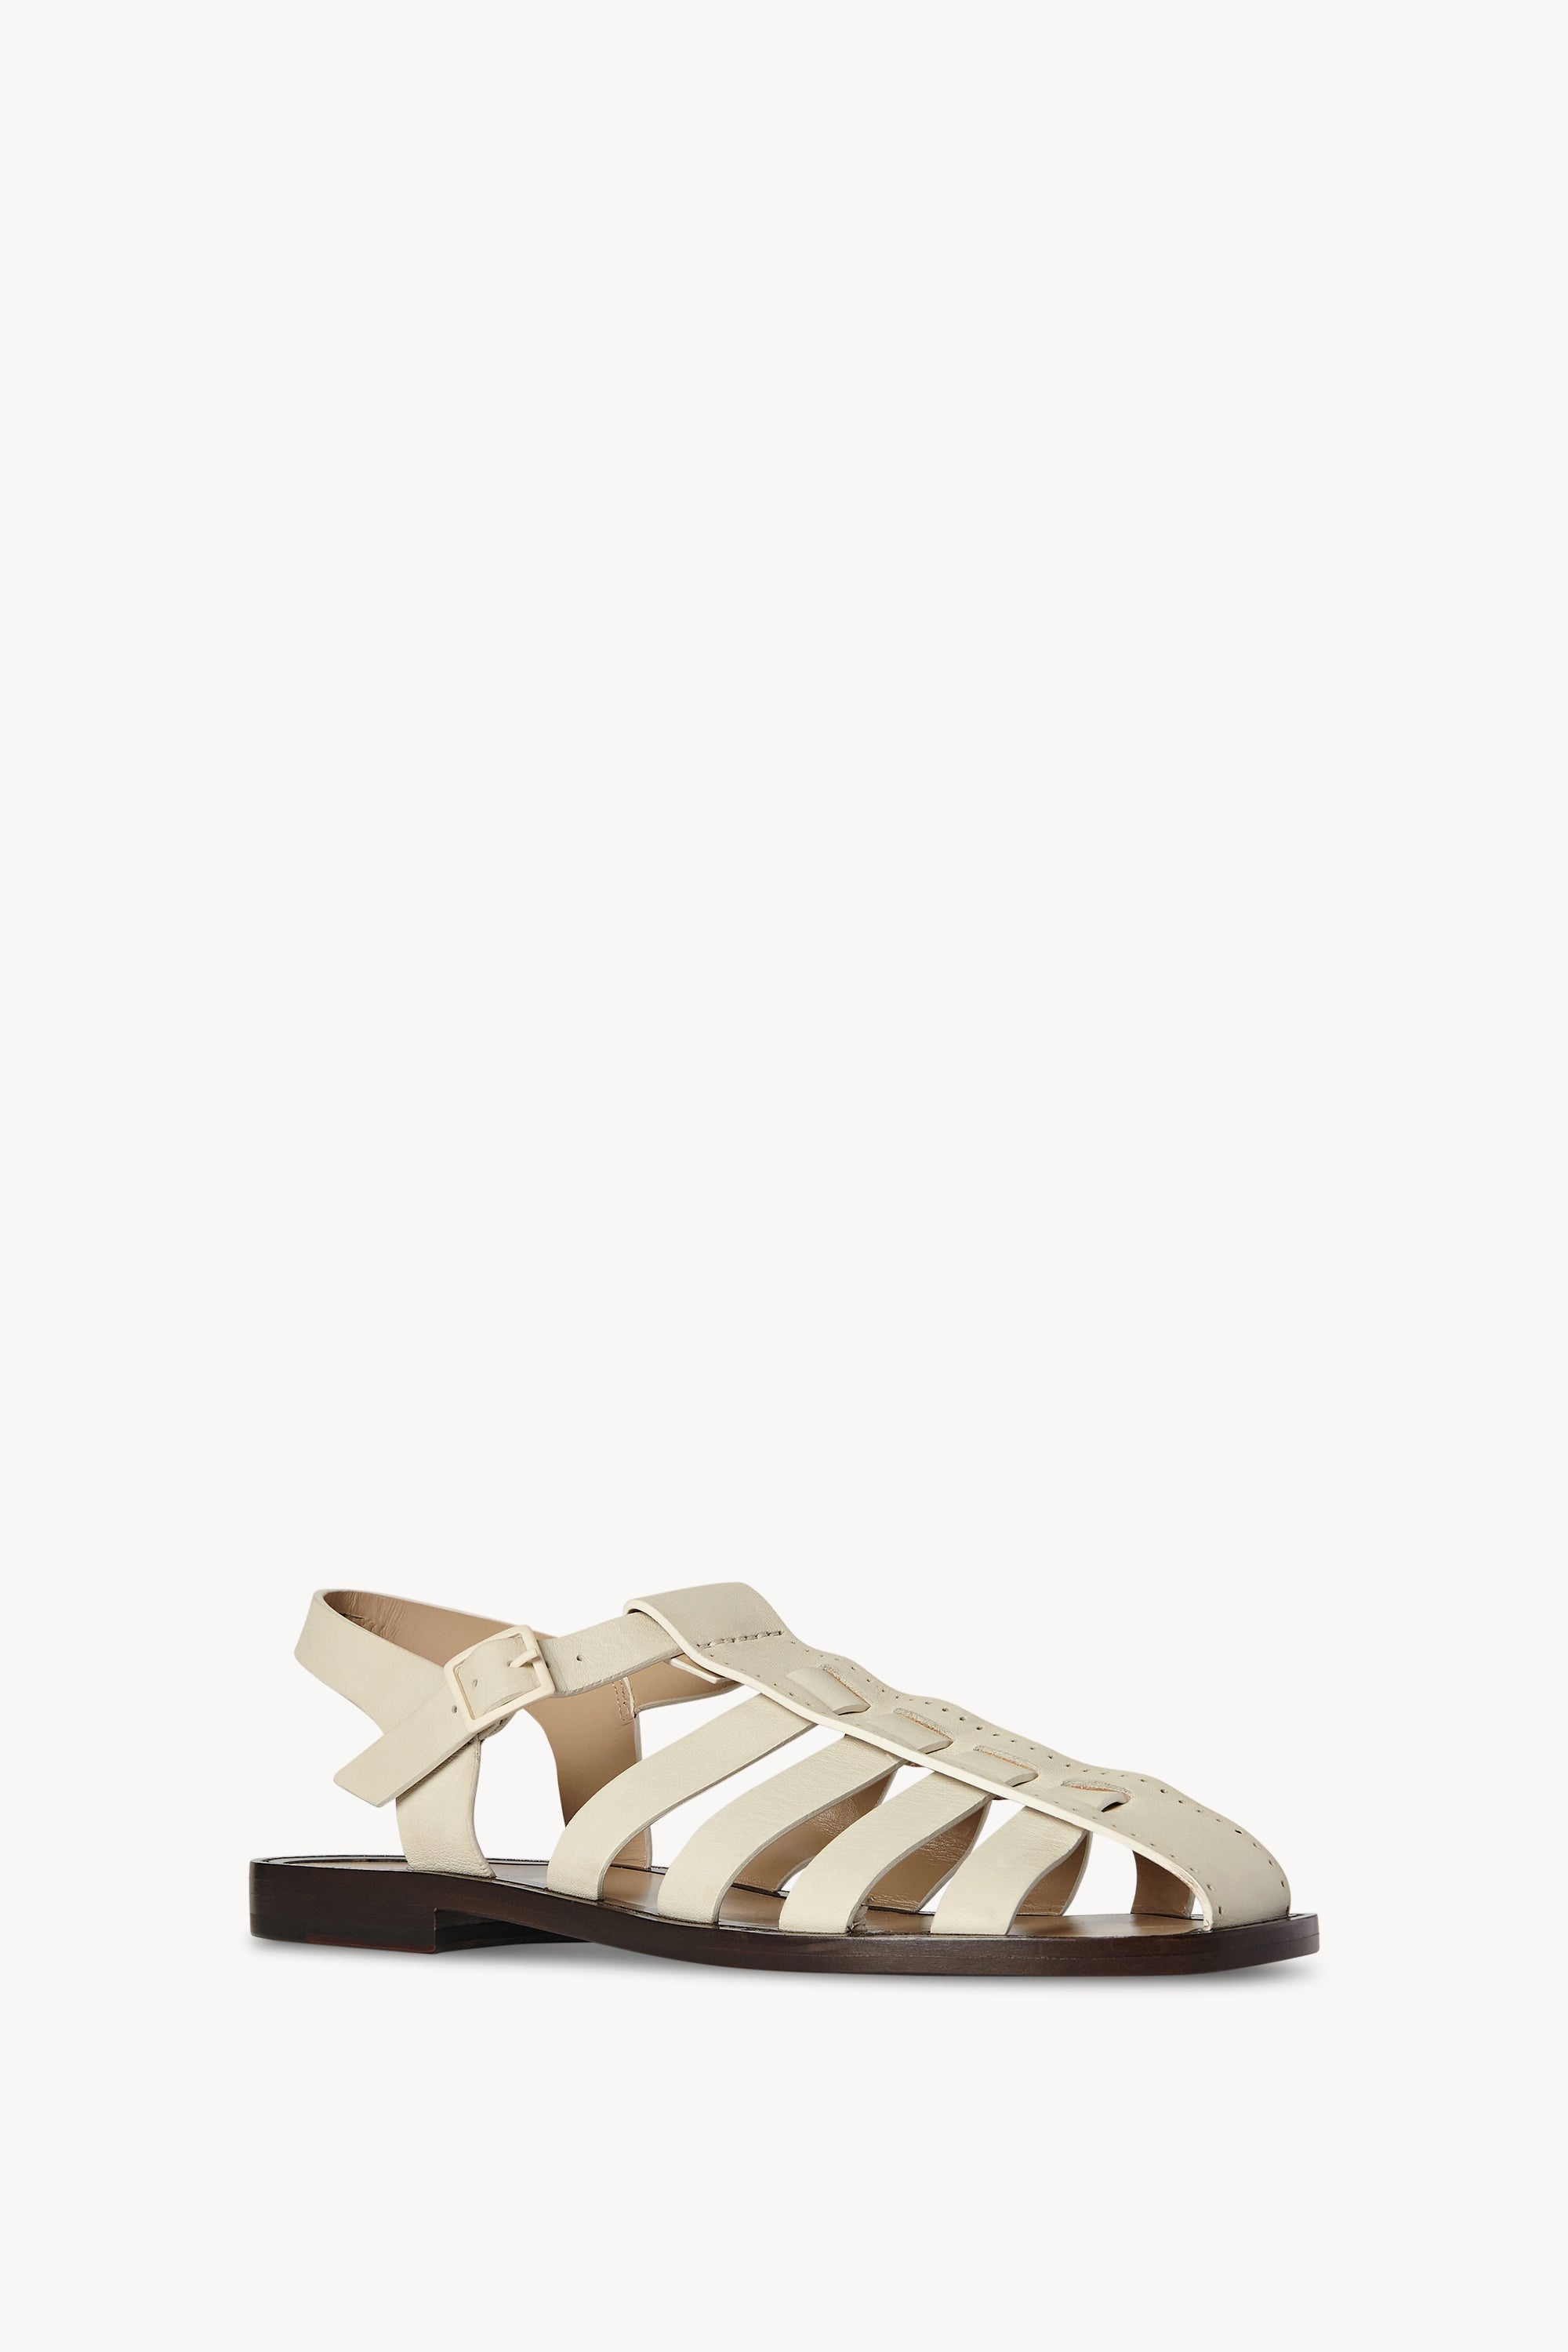 Pablo Sandal in Leather - 2